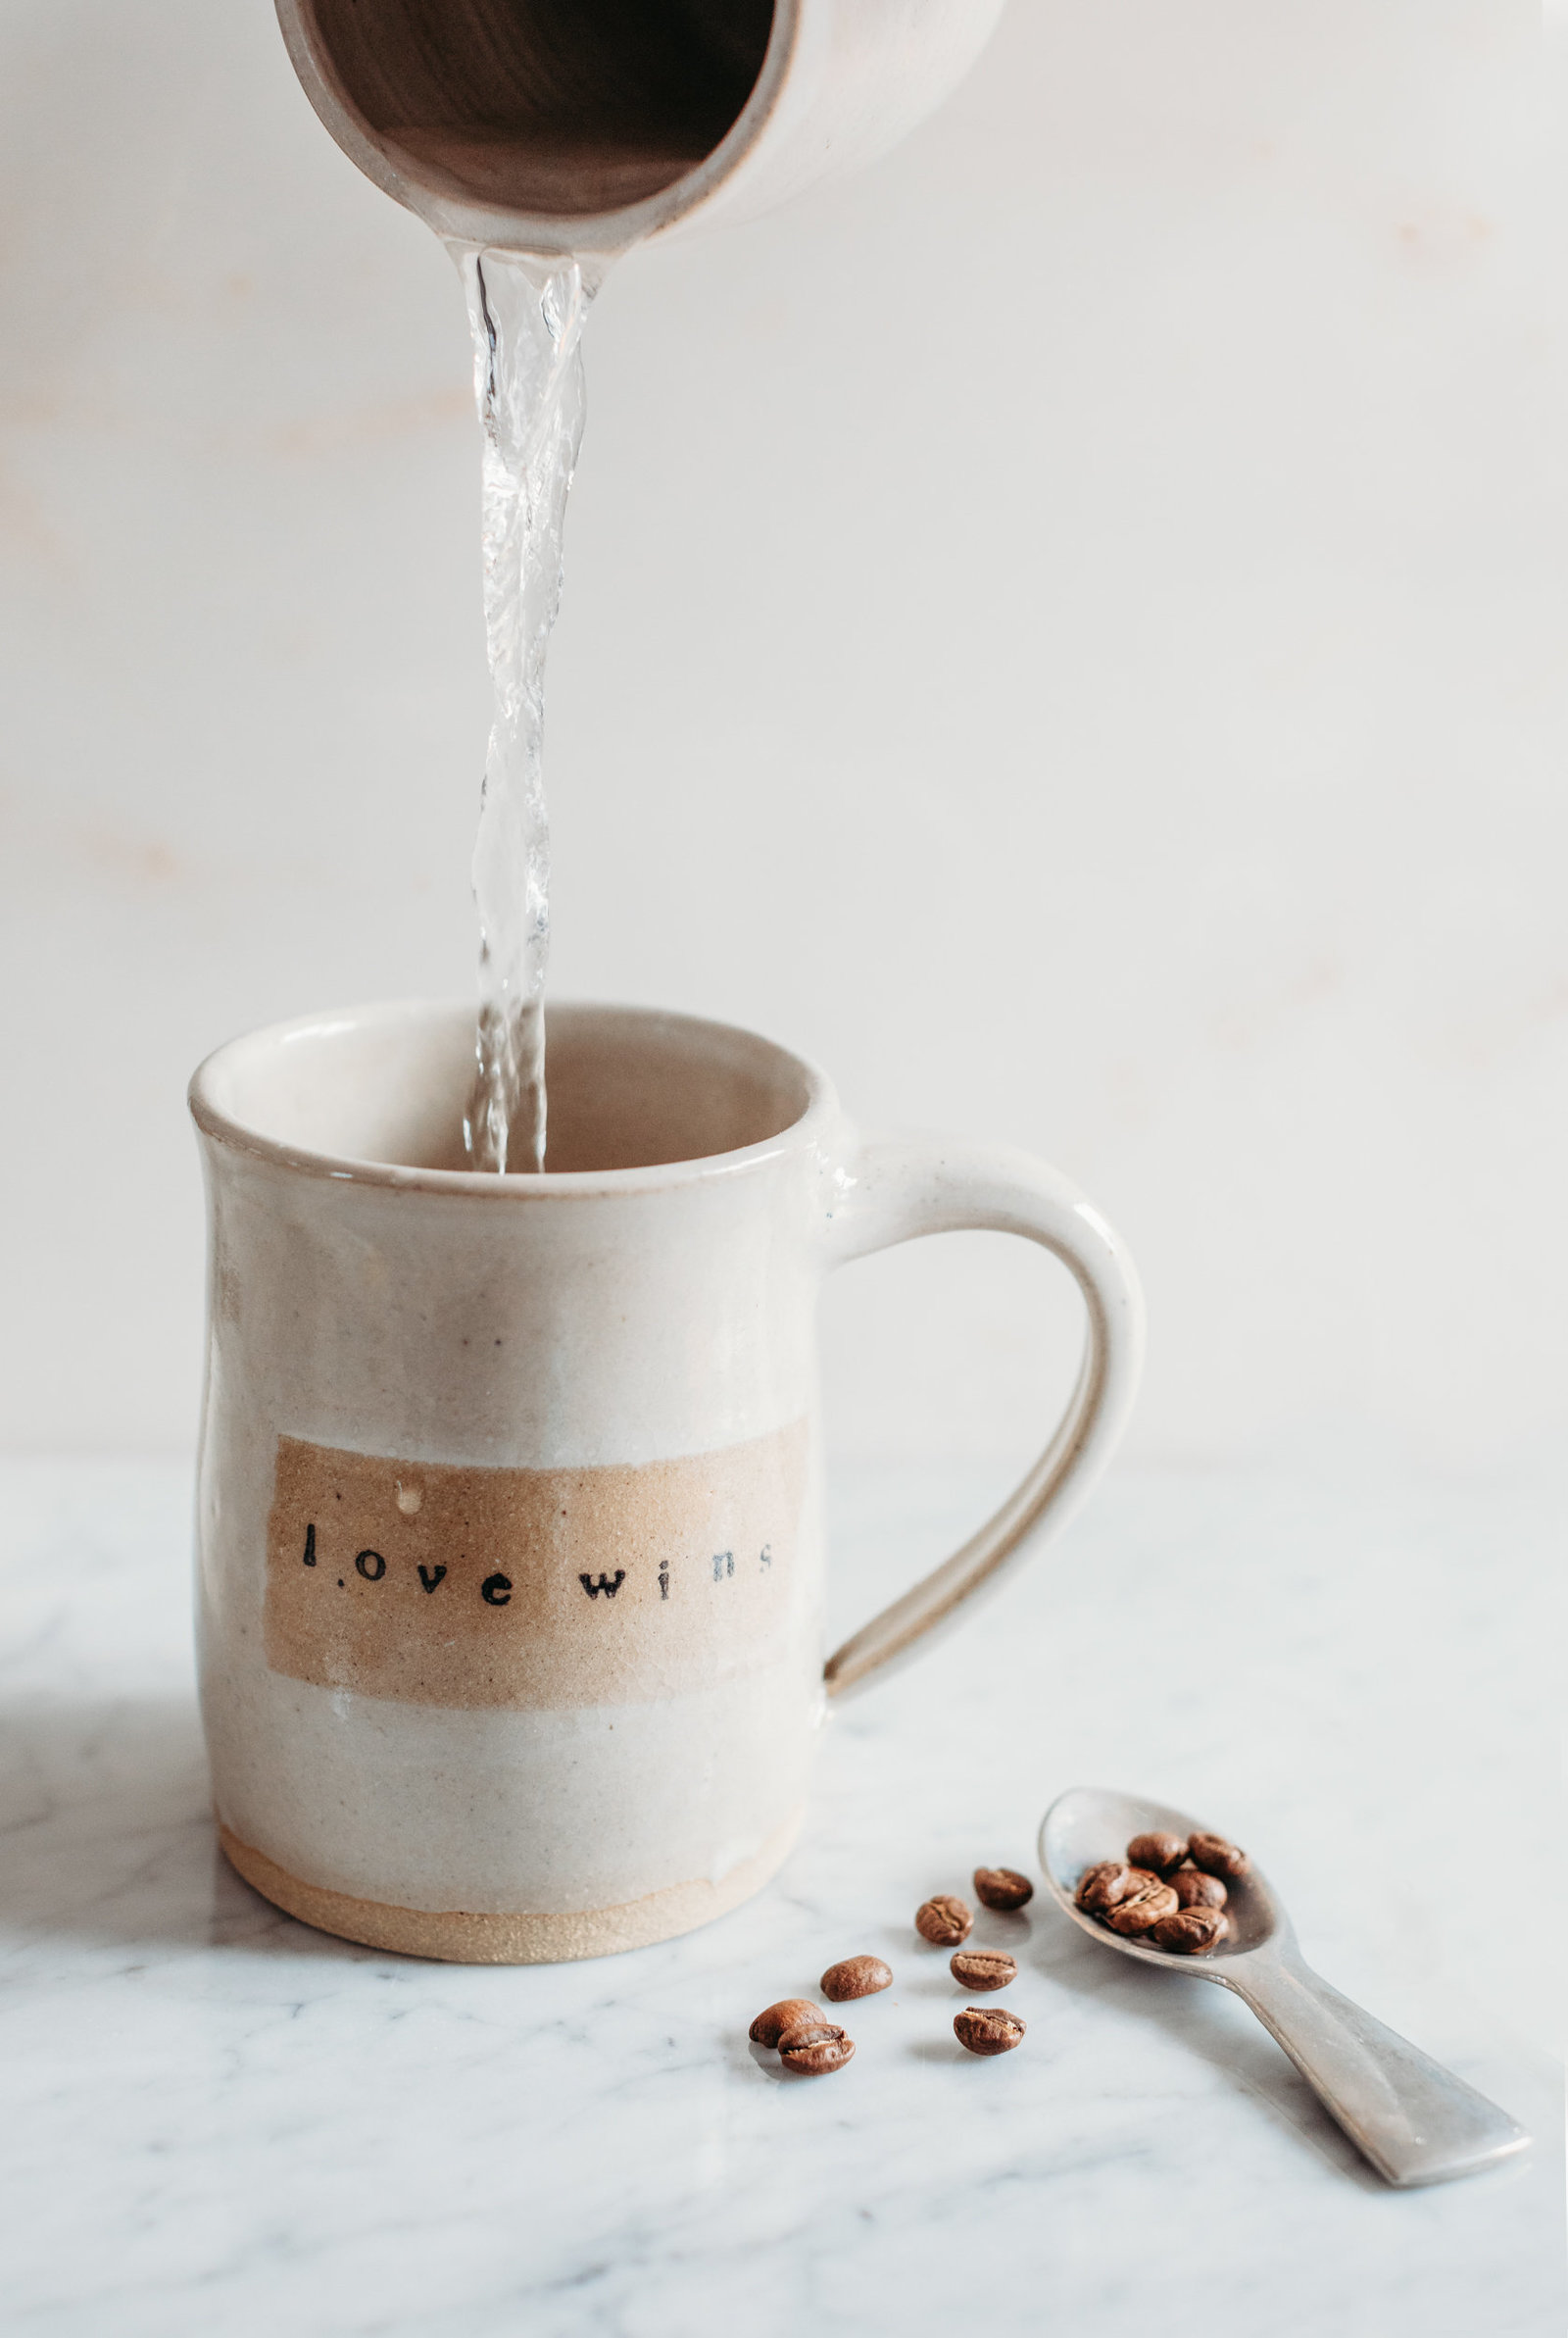 product shot of a tan coffee mug and coffee beans